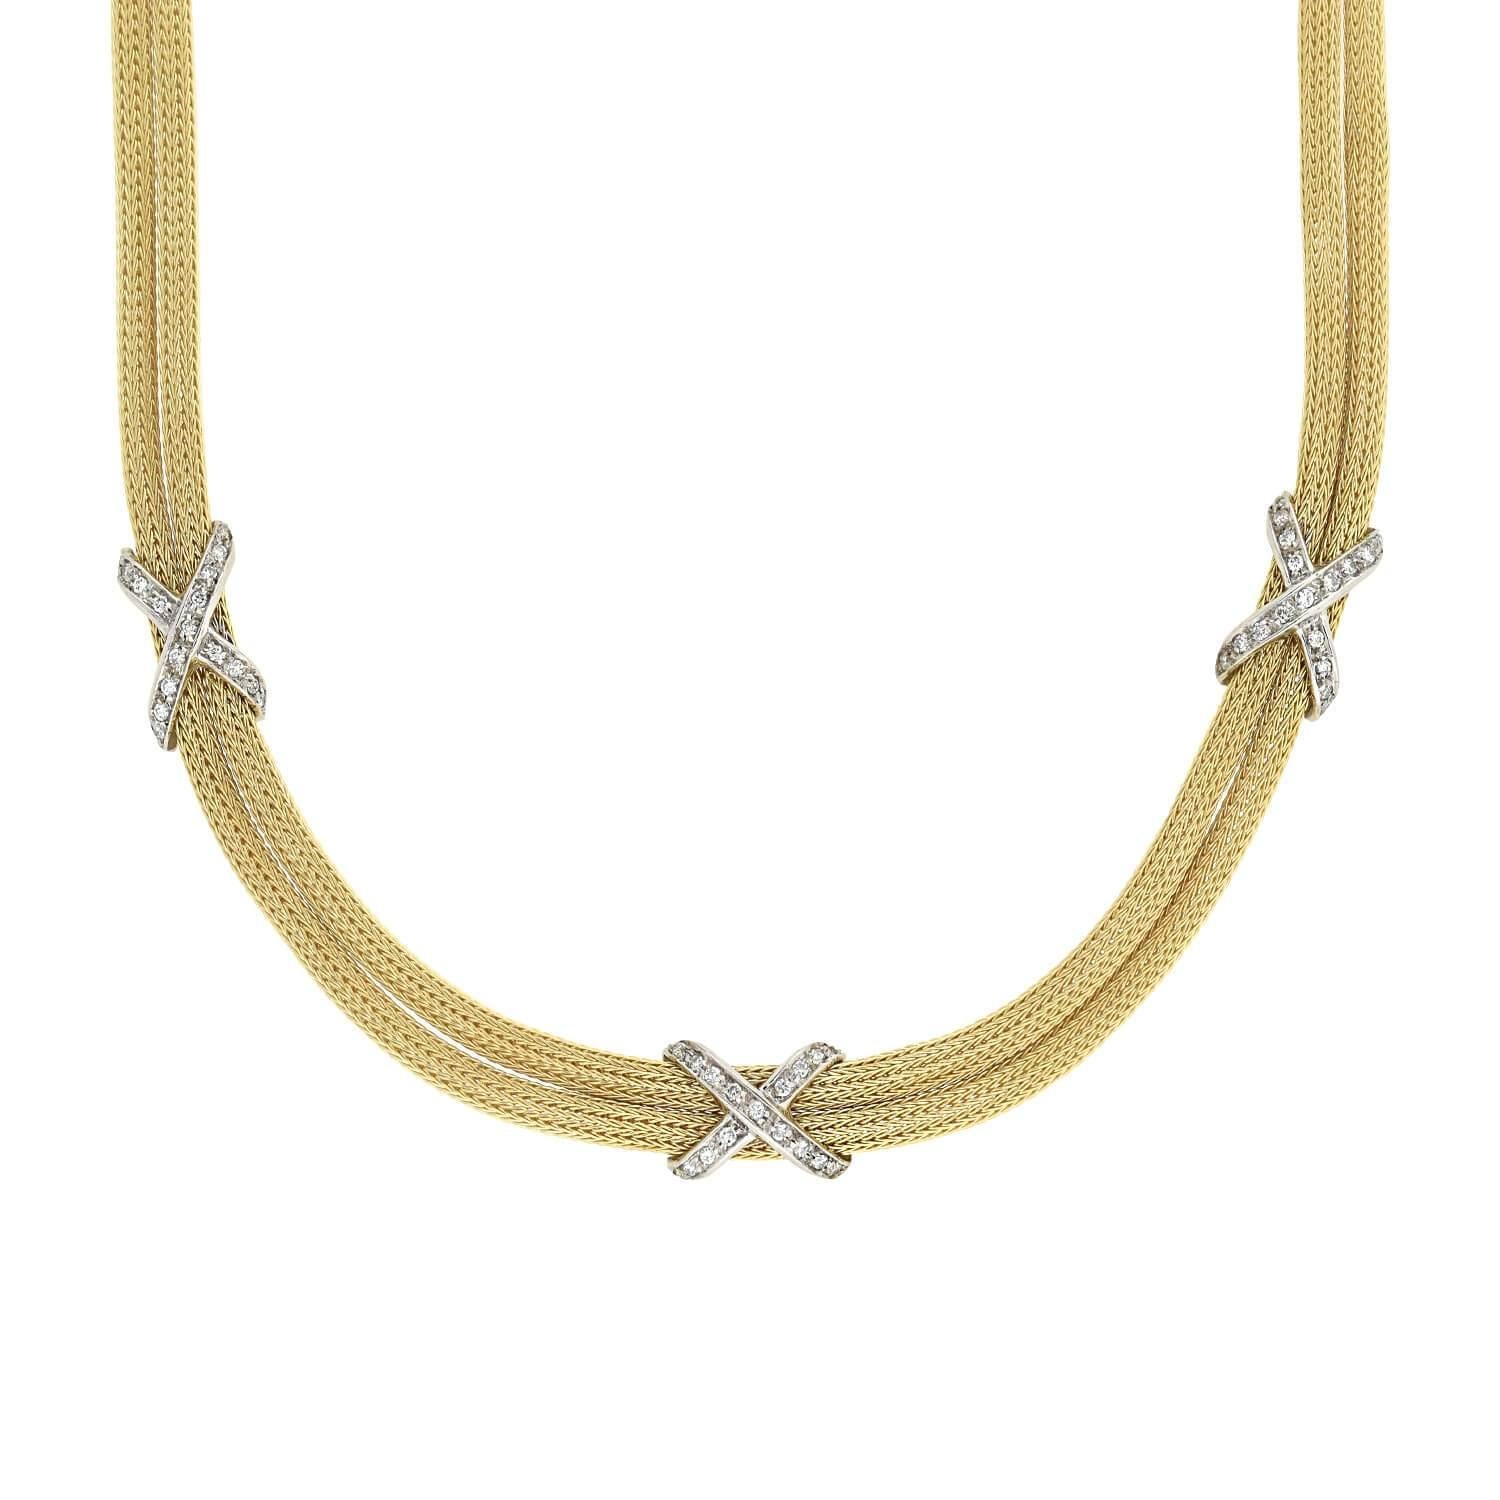 A stunning contemporary diamond necklace! This fabulous piece is comprised of two vibrant 14kt yellow gold mesh chains that come together to form a classic yet bold appeal. Three 14kt white gold x-shaped motifs cinch the two chains in a symmetrical